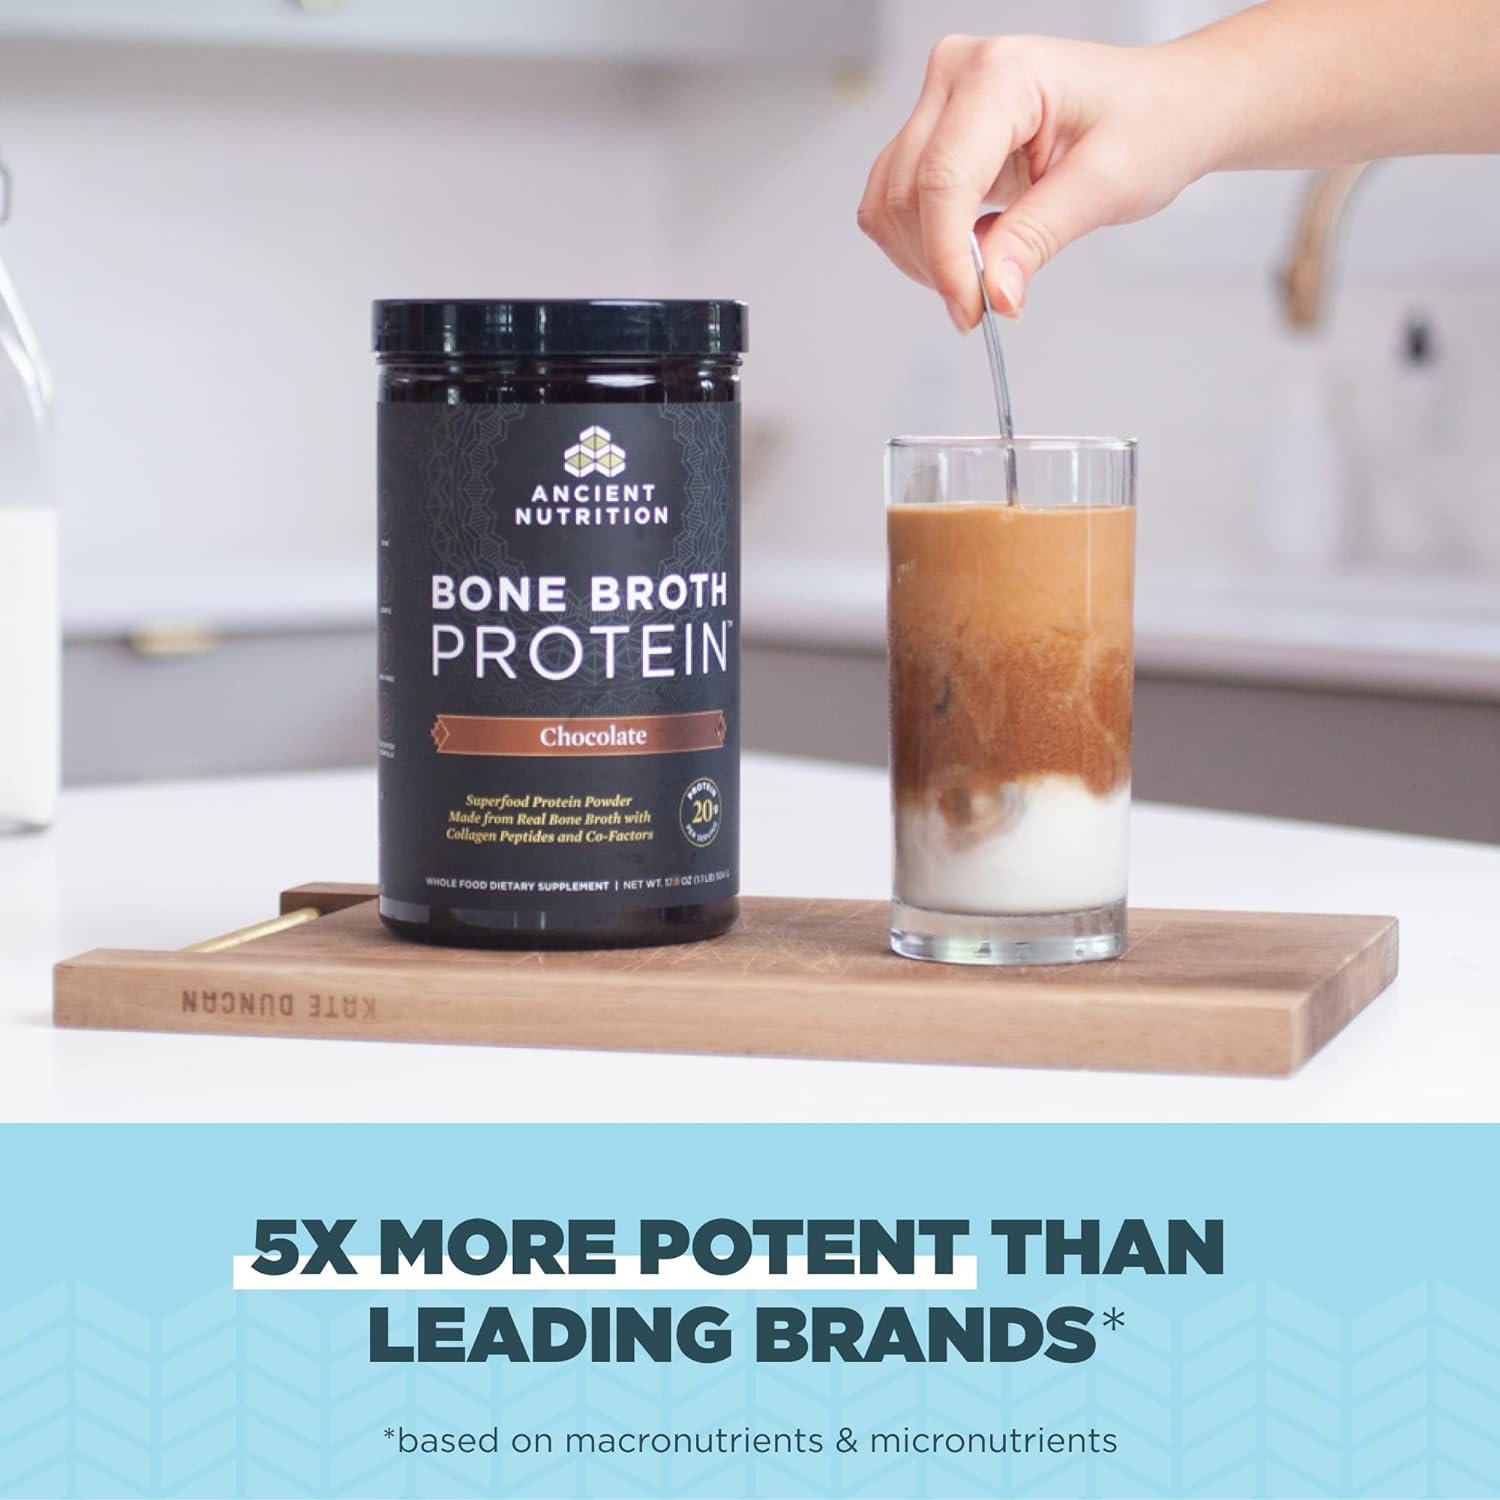 Ancient Nutrition Protein Powder Made from Real Bone Broth, Chocolate,